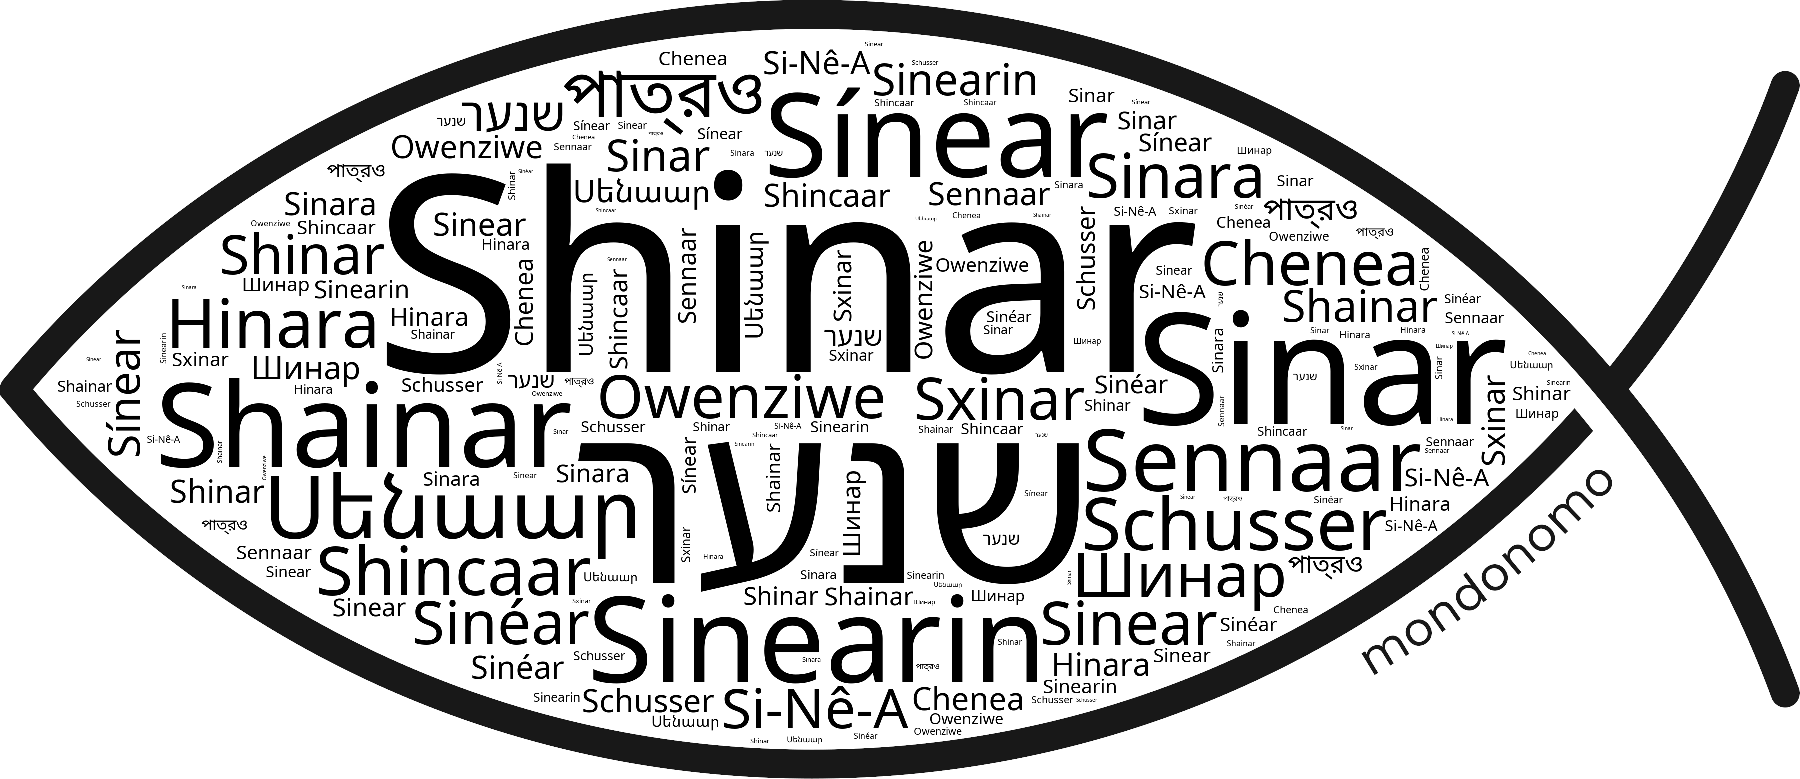 Name Shinar in the world's Bibles